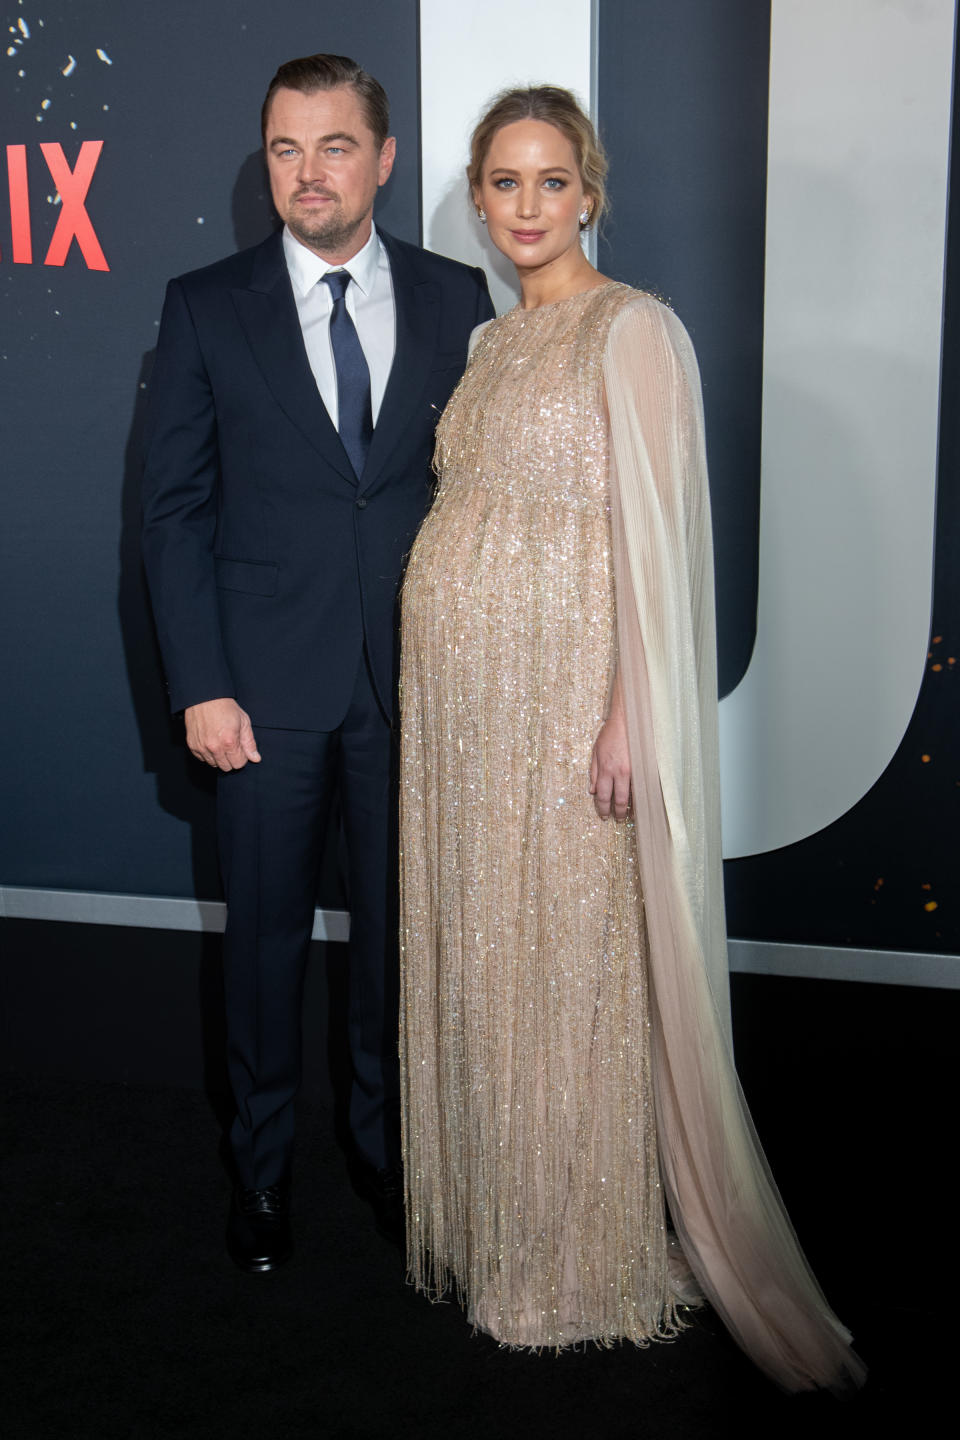 Leonardo DiCaprio and Jennifer Lawrence at the World Premiere Of Netflix's "Don't Look Up"